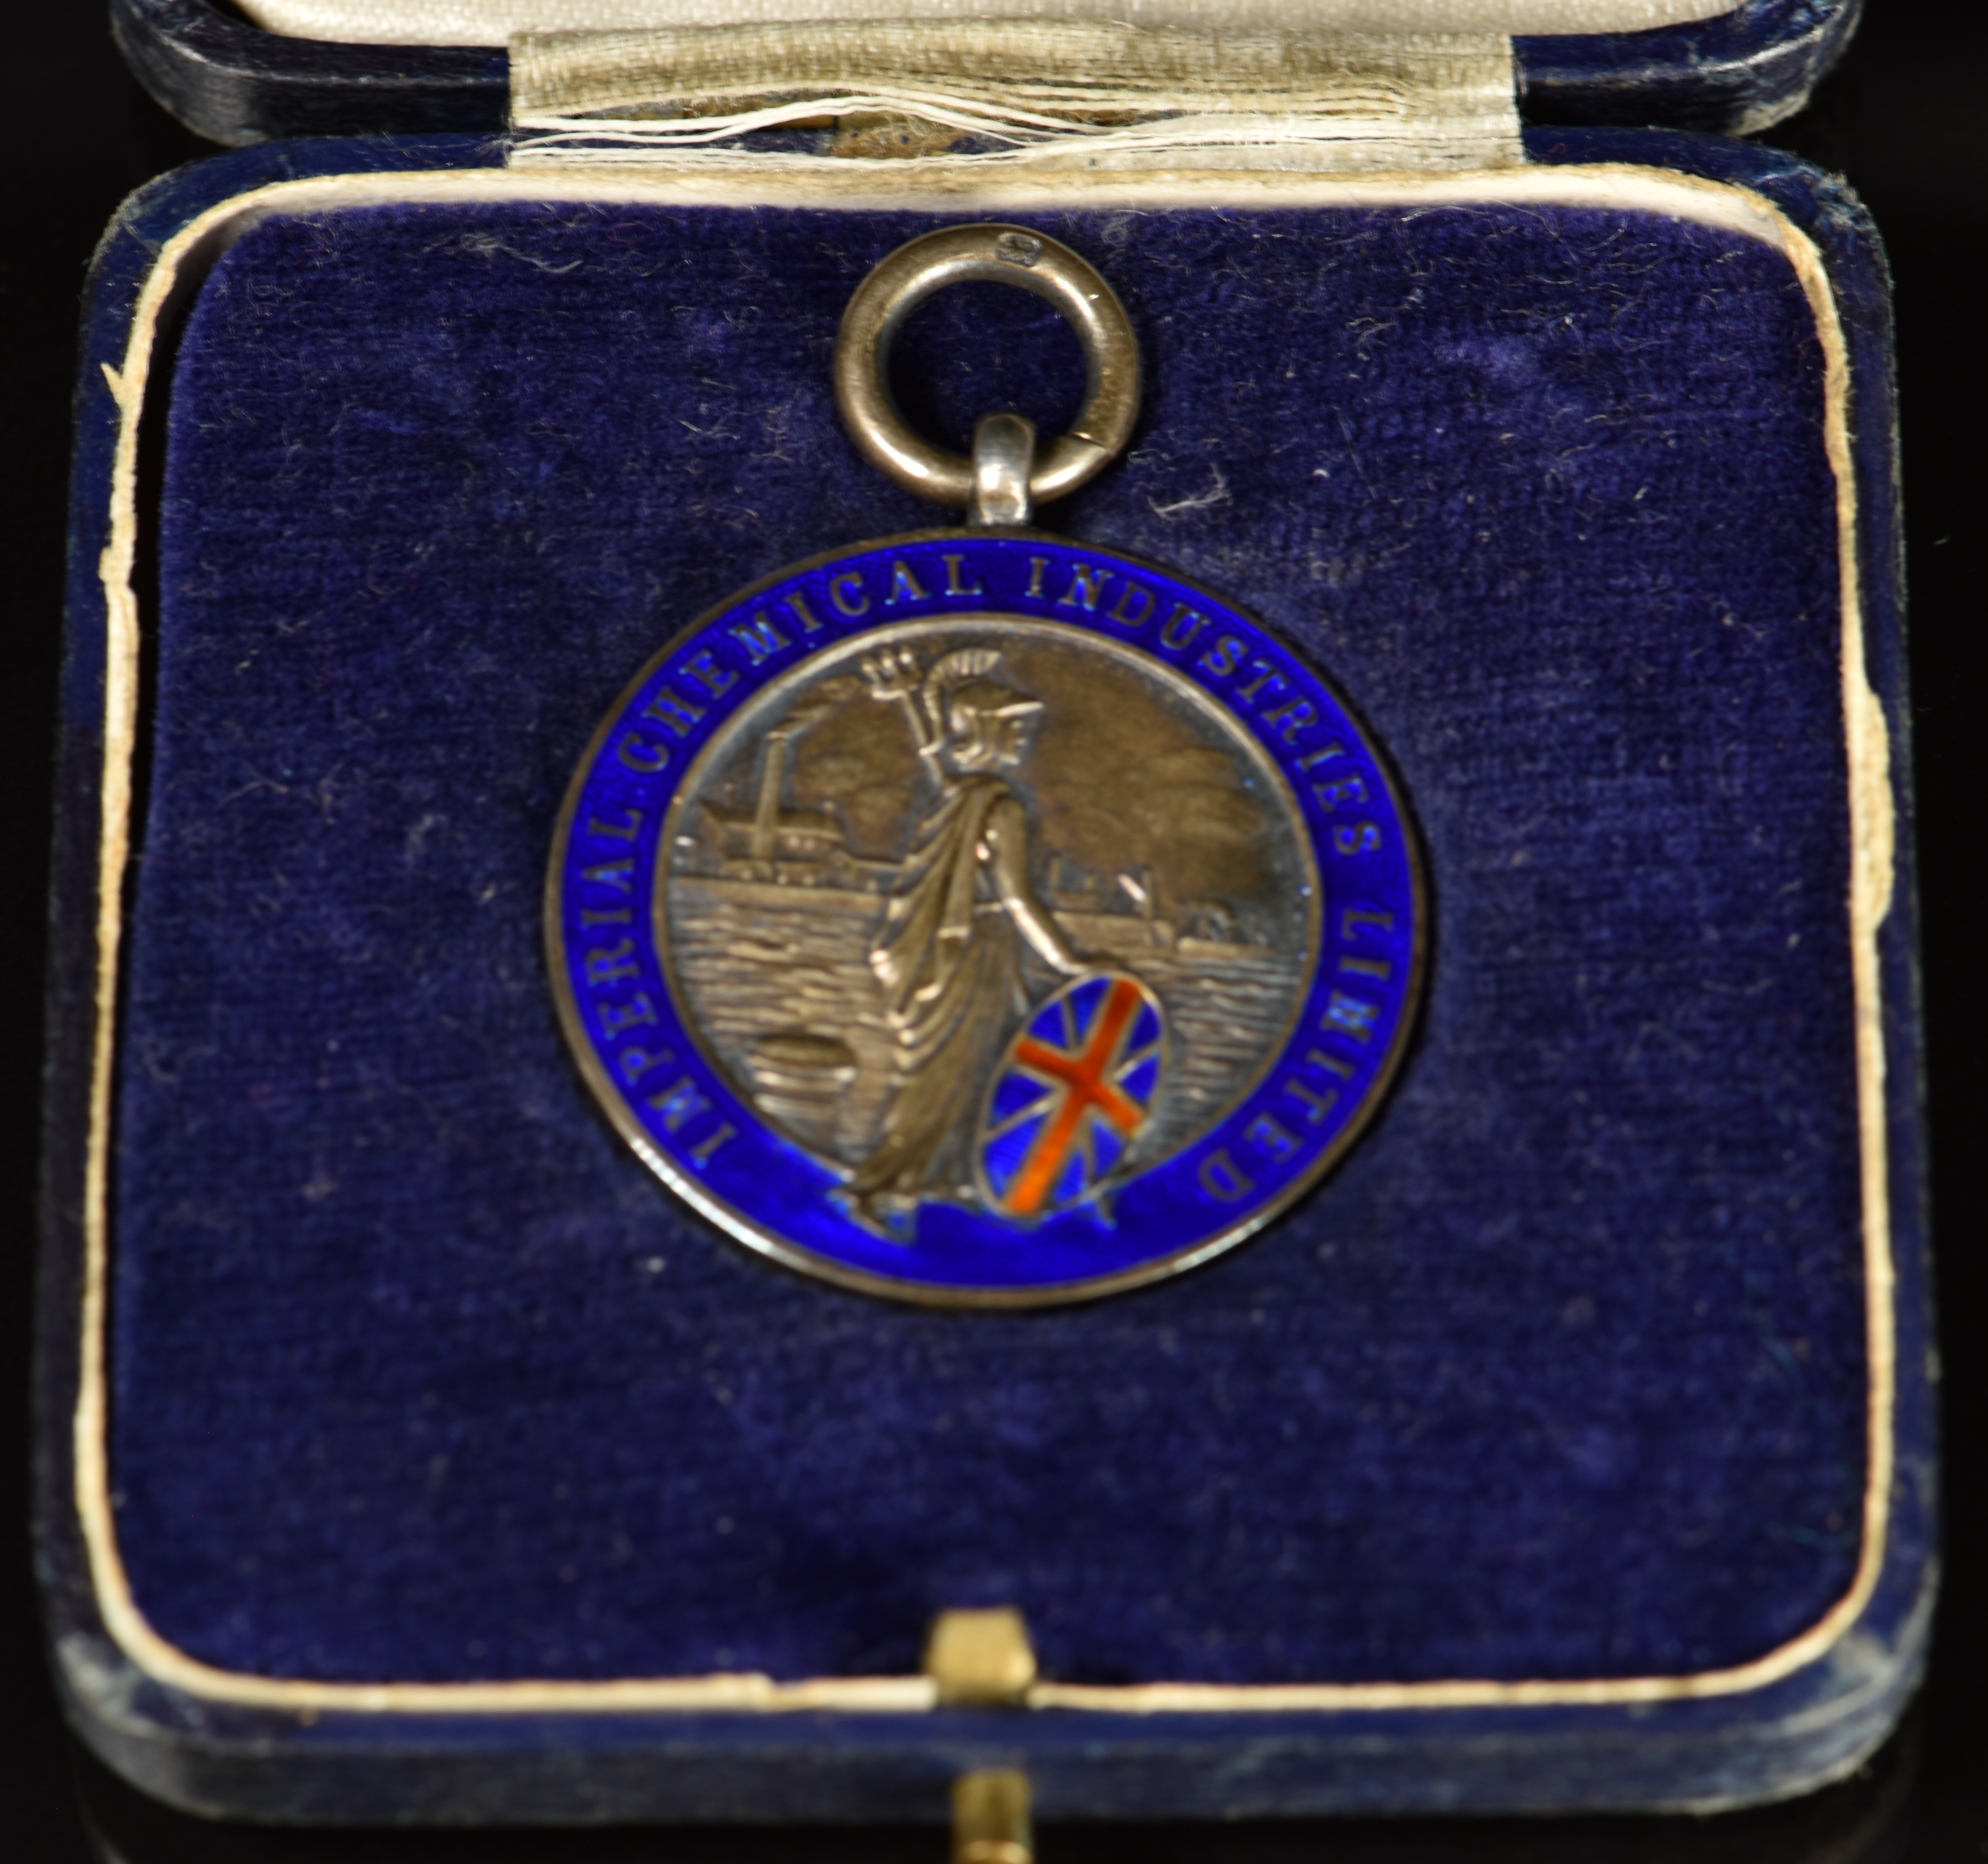 A 9ct gold Faithful Service Medal for 'Imperial Chemical Industries Limited', in box, 25g - Image 2 of 4